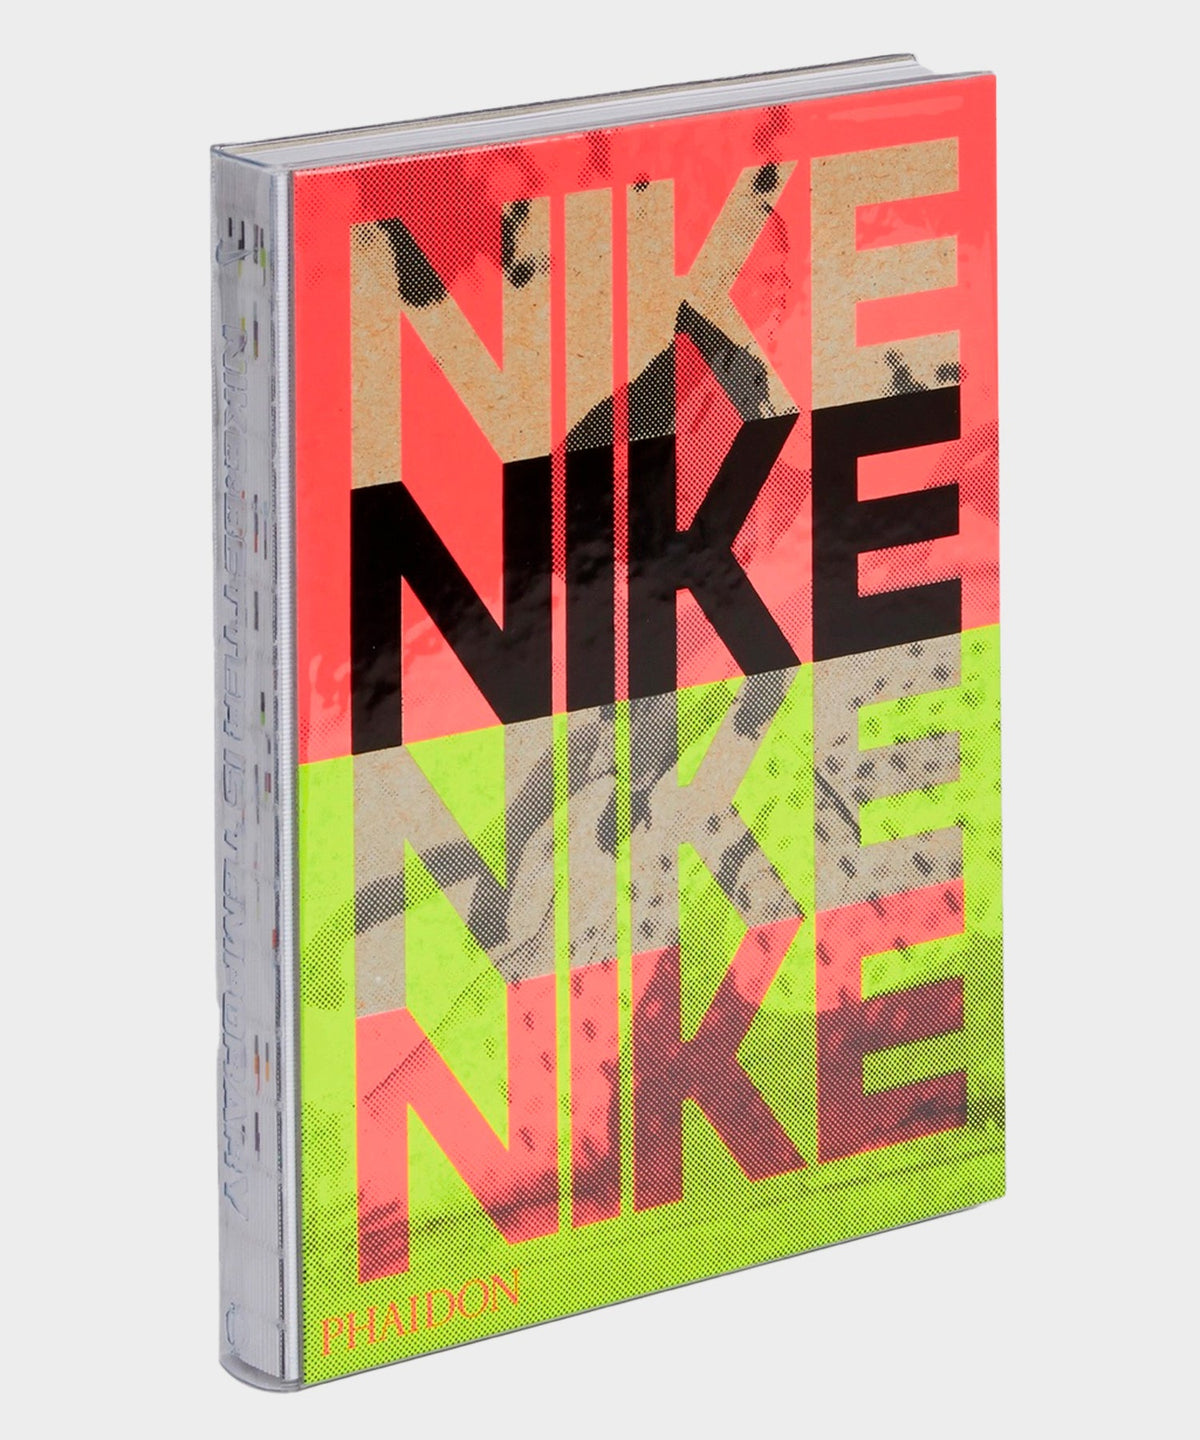 Phaidon "Nike Better is Temporary" Book